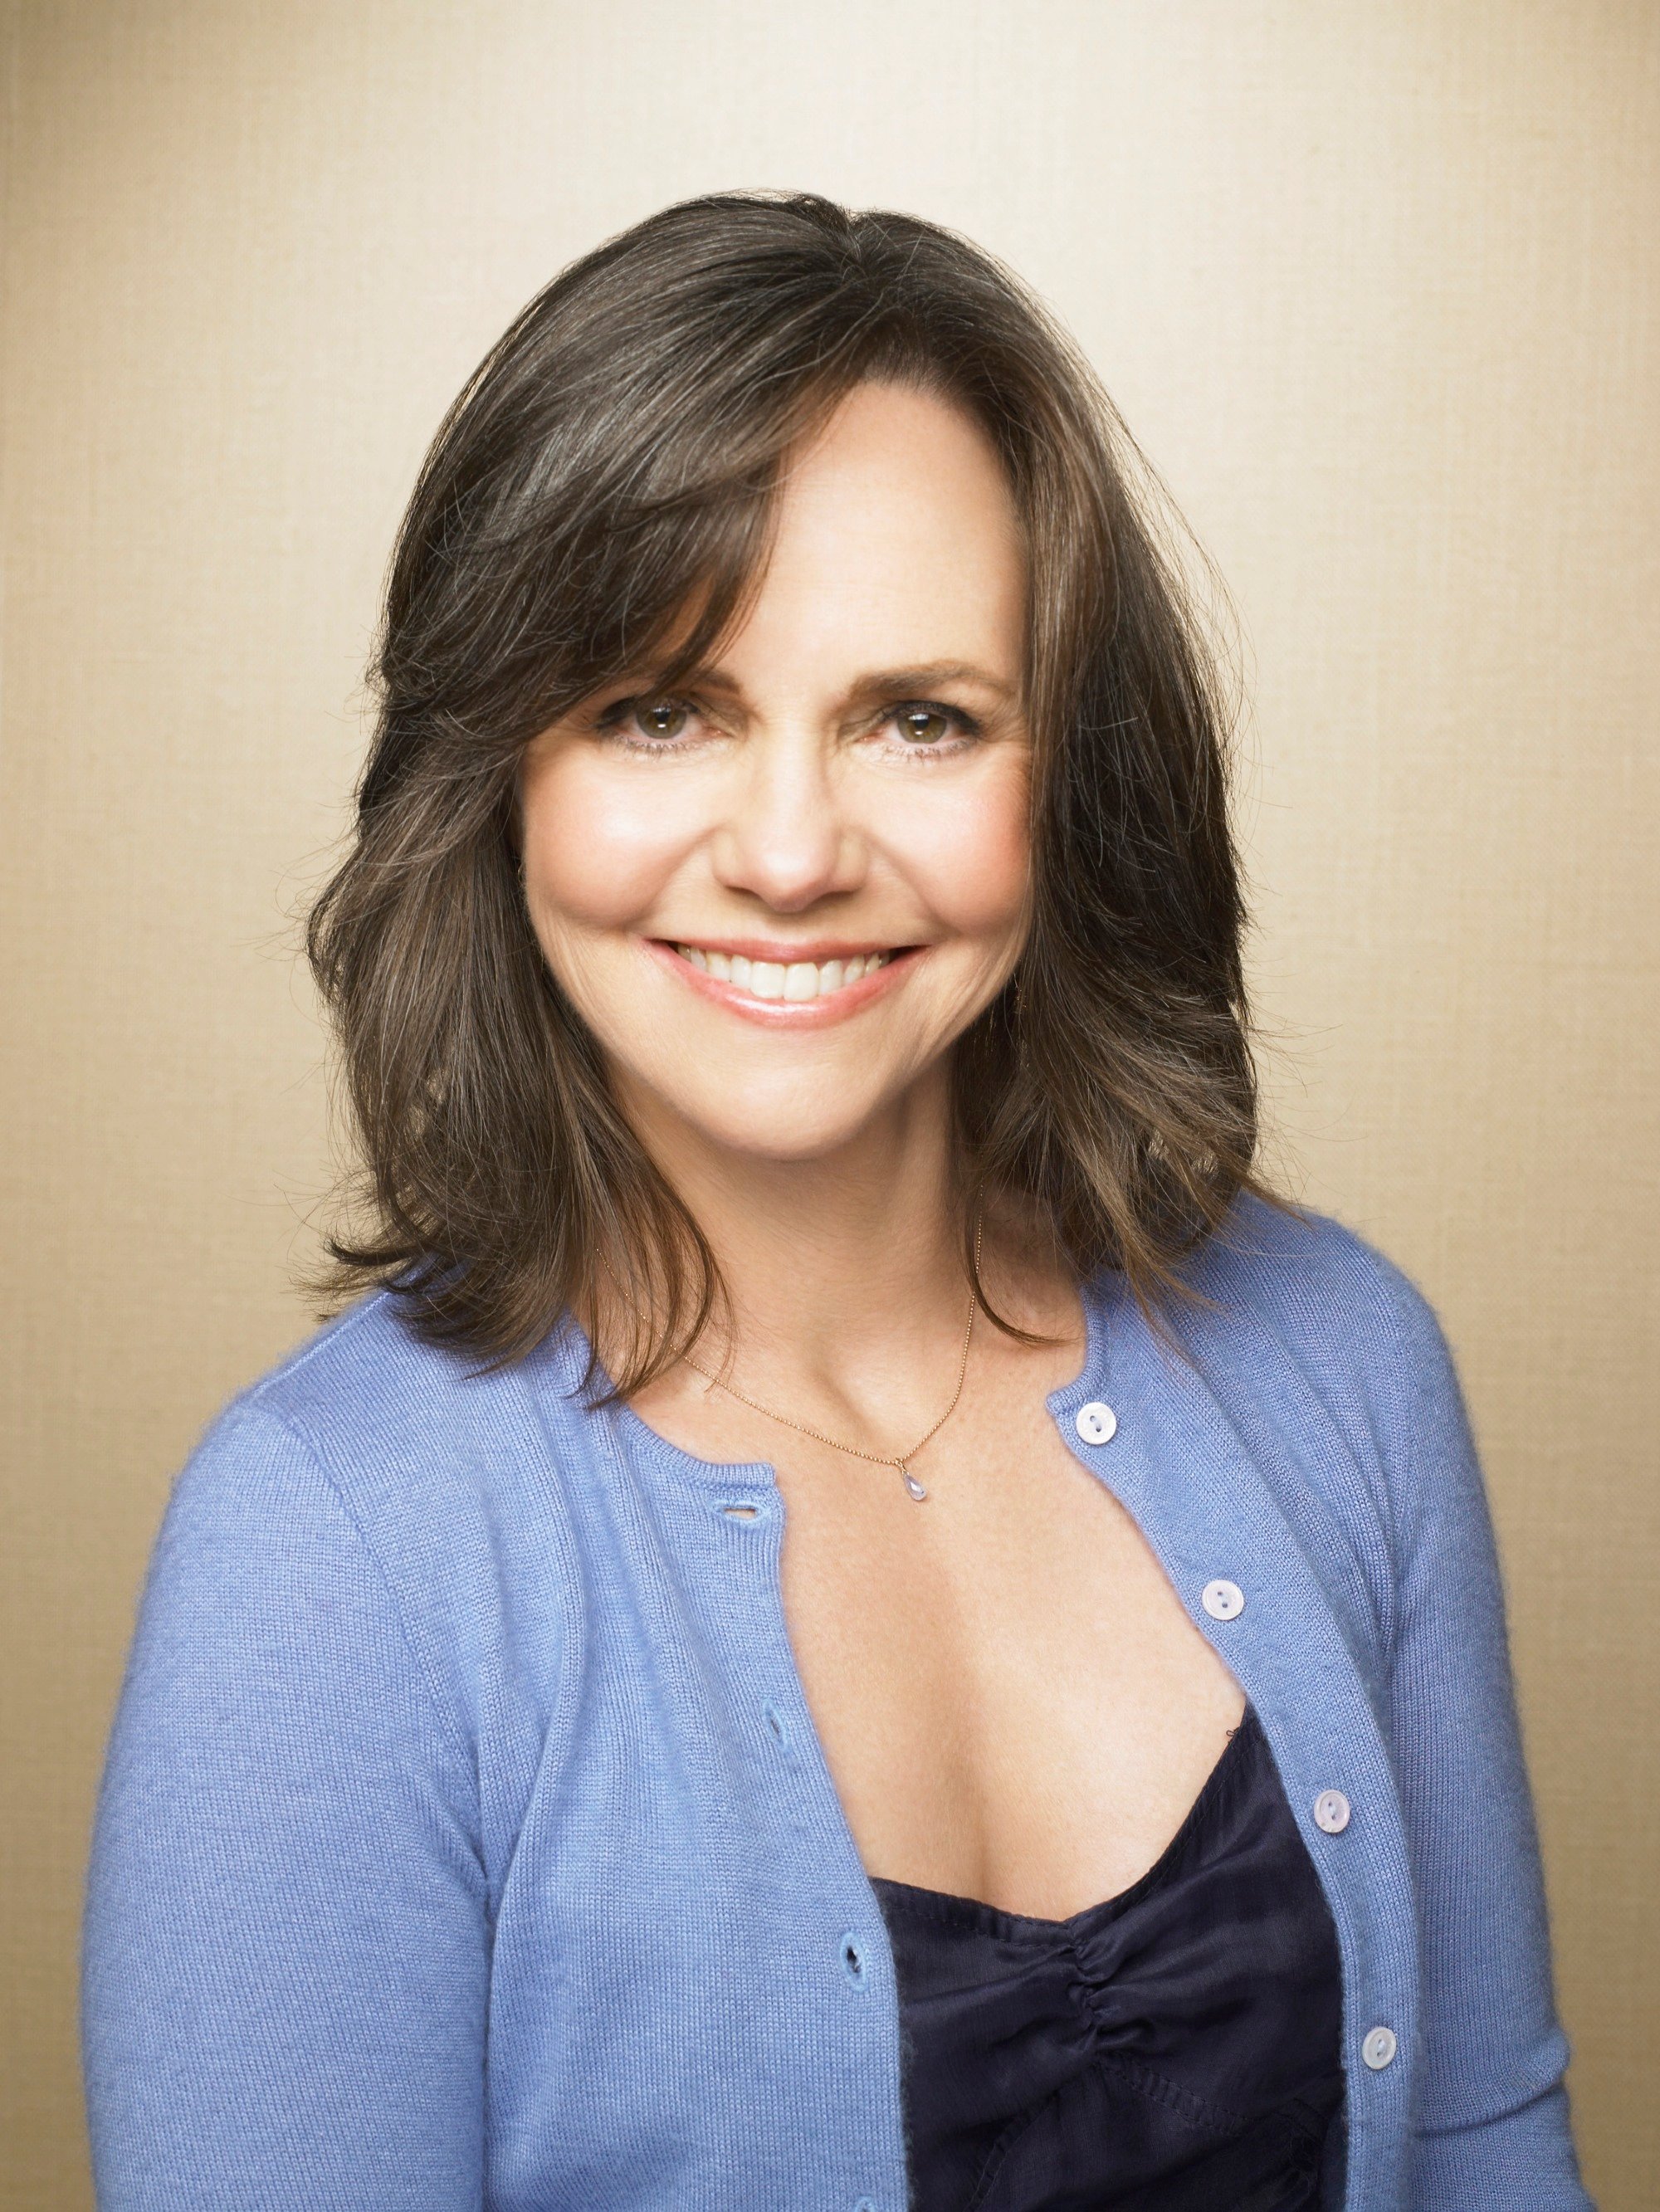 Sally Field image Sally HD wallpapers and backgrounds photos.